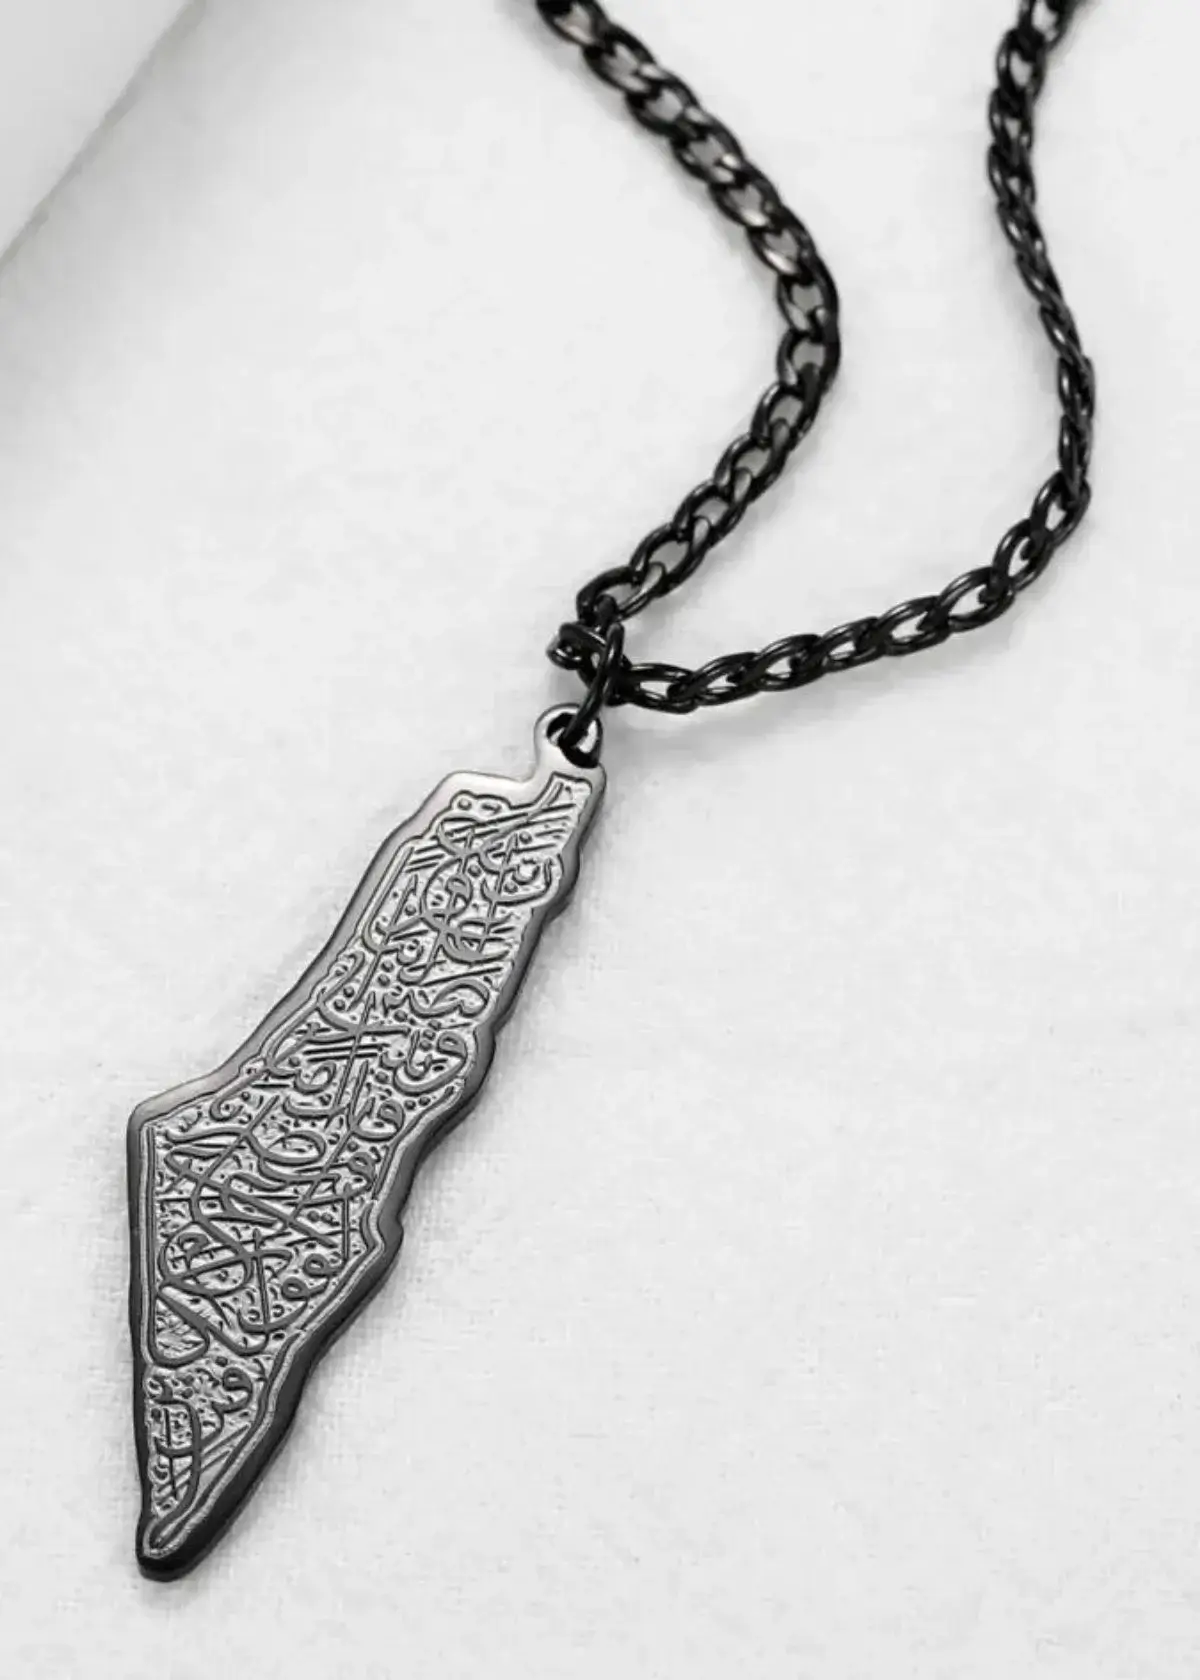 How do I care for and maintain my Palestine Necklace?